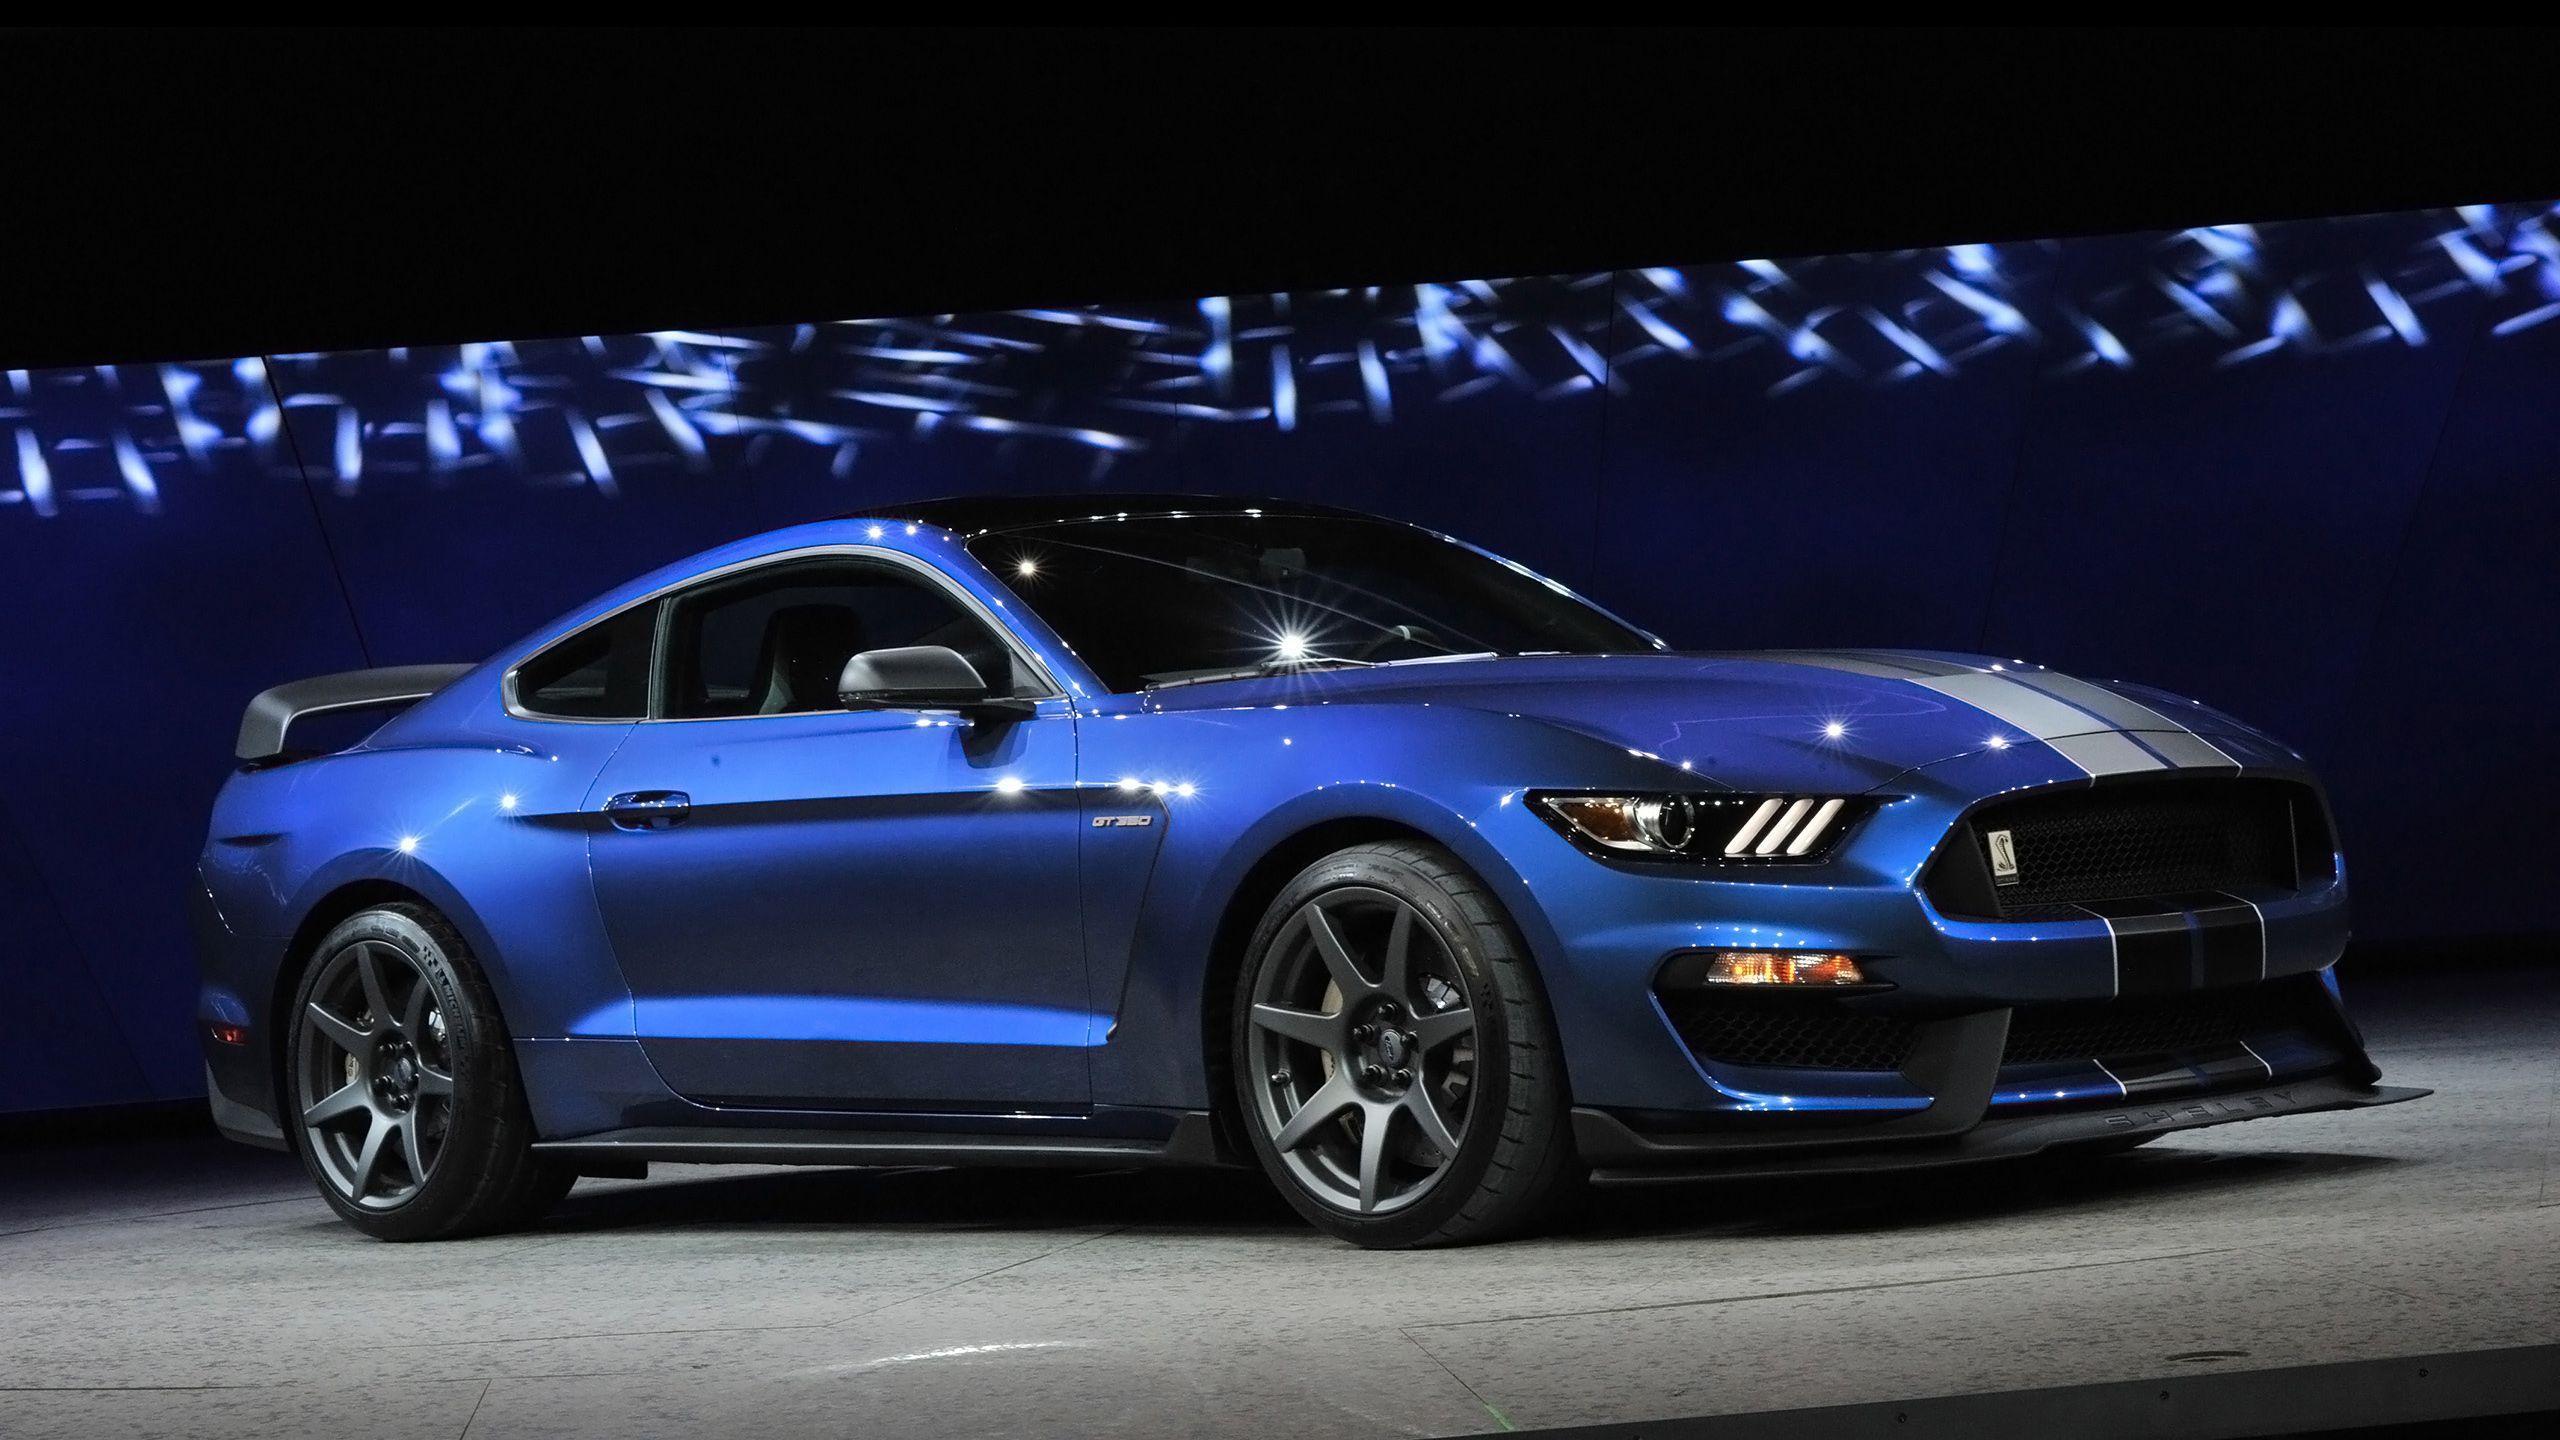 Blue Ford Mustang Wallpaper Free Blue Ford Mustang Background